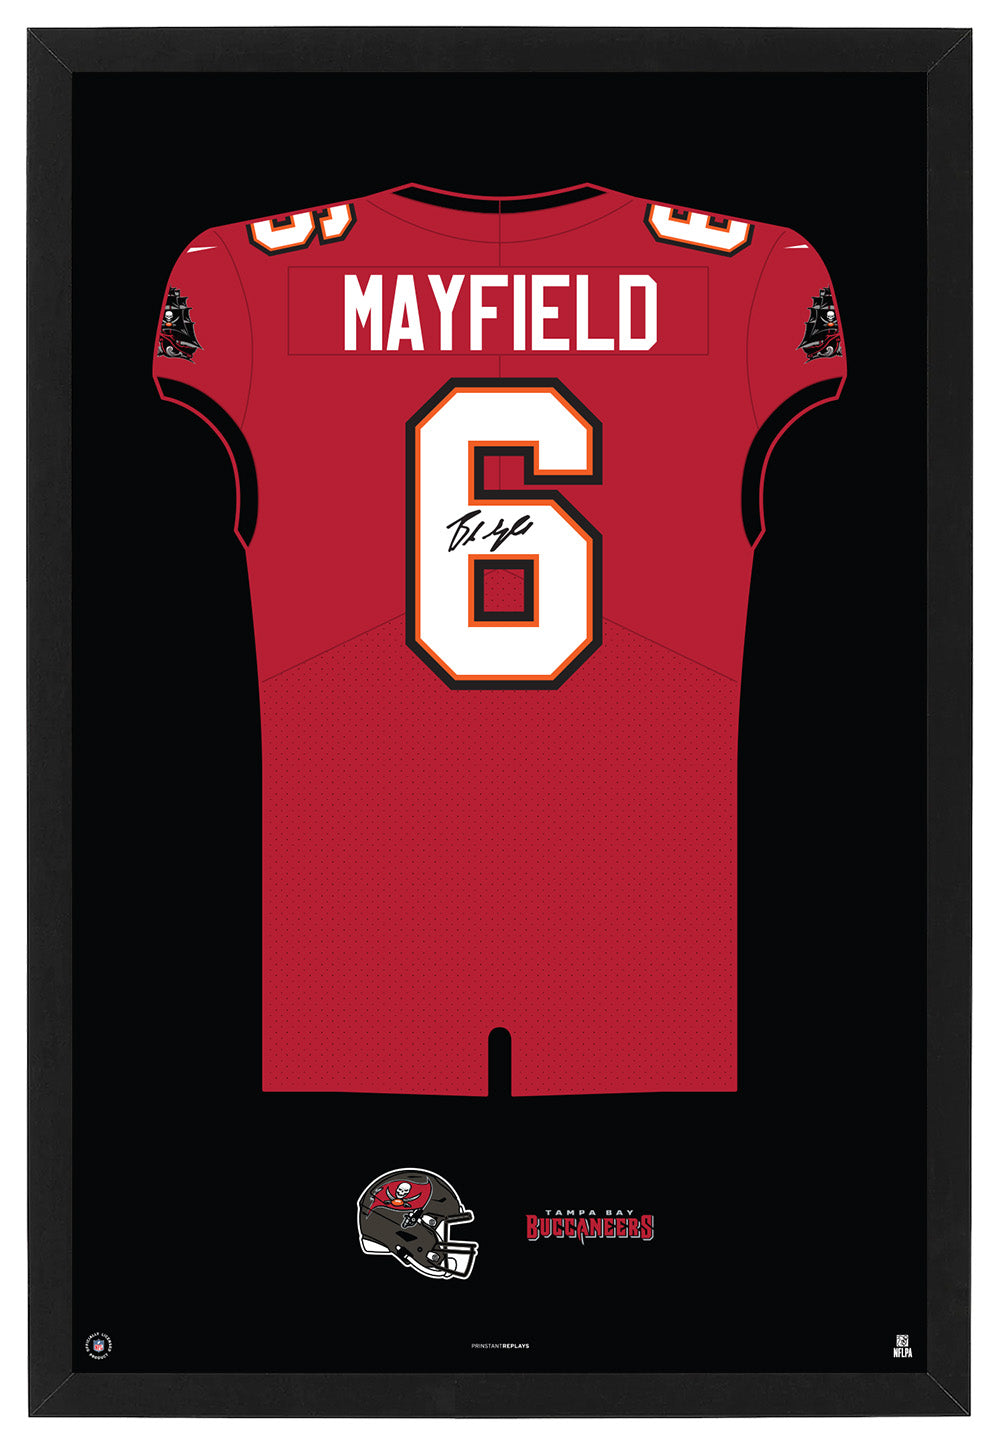 Tampa Bay Buccaneers Baker Mayfield Autographed Jersey Framed Print